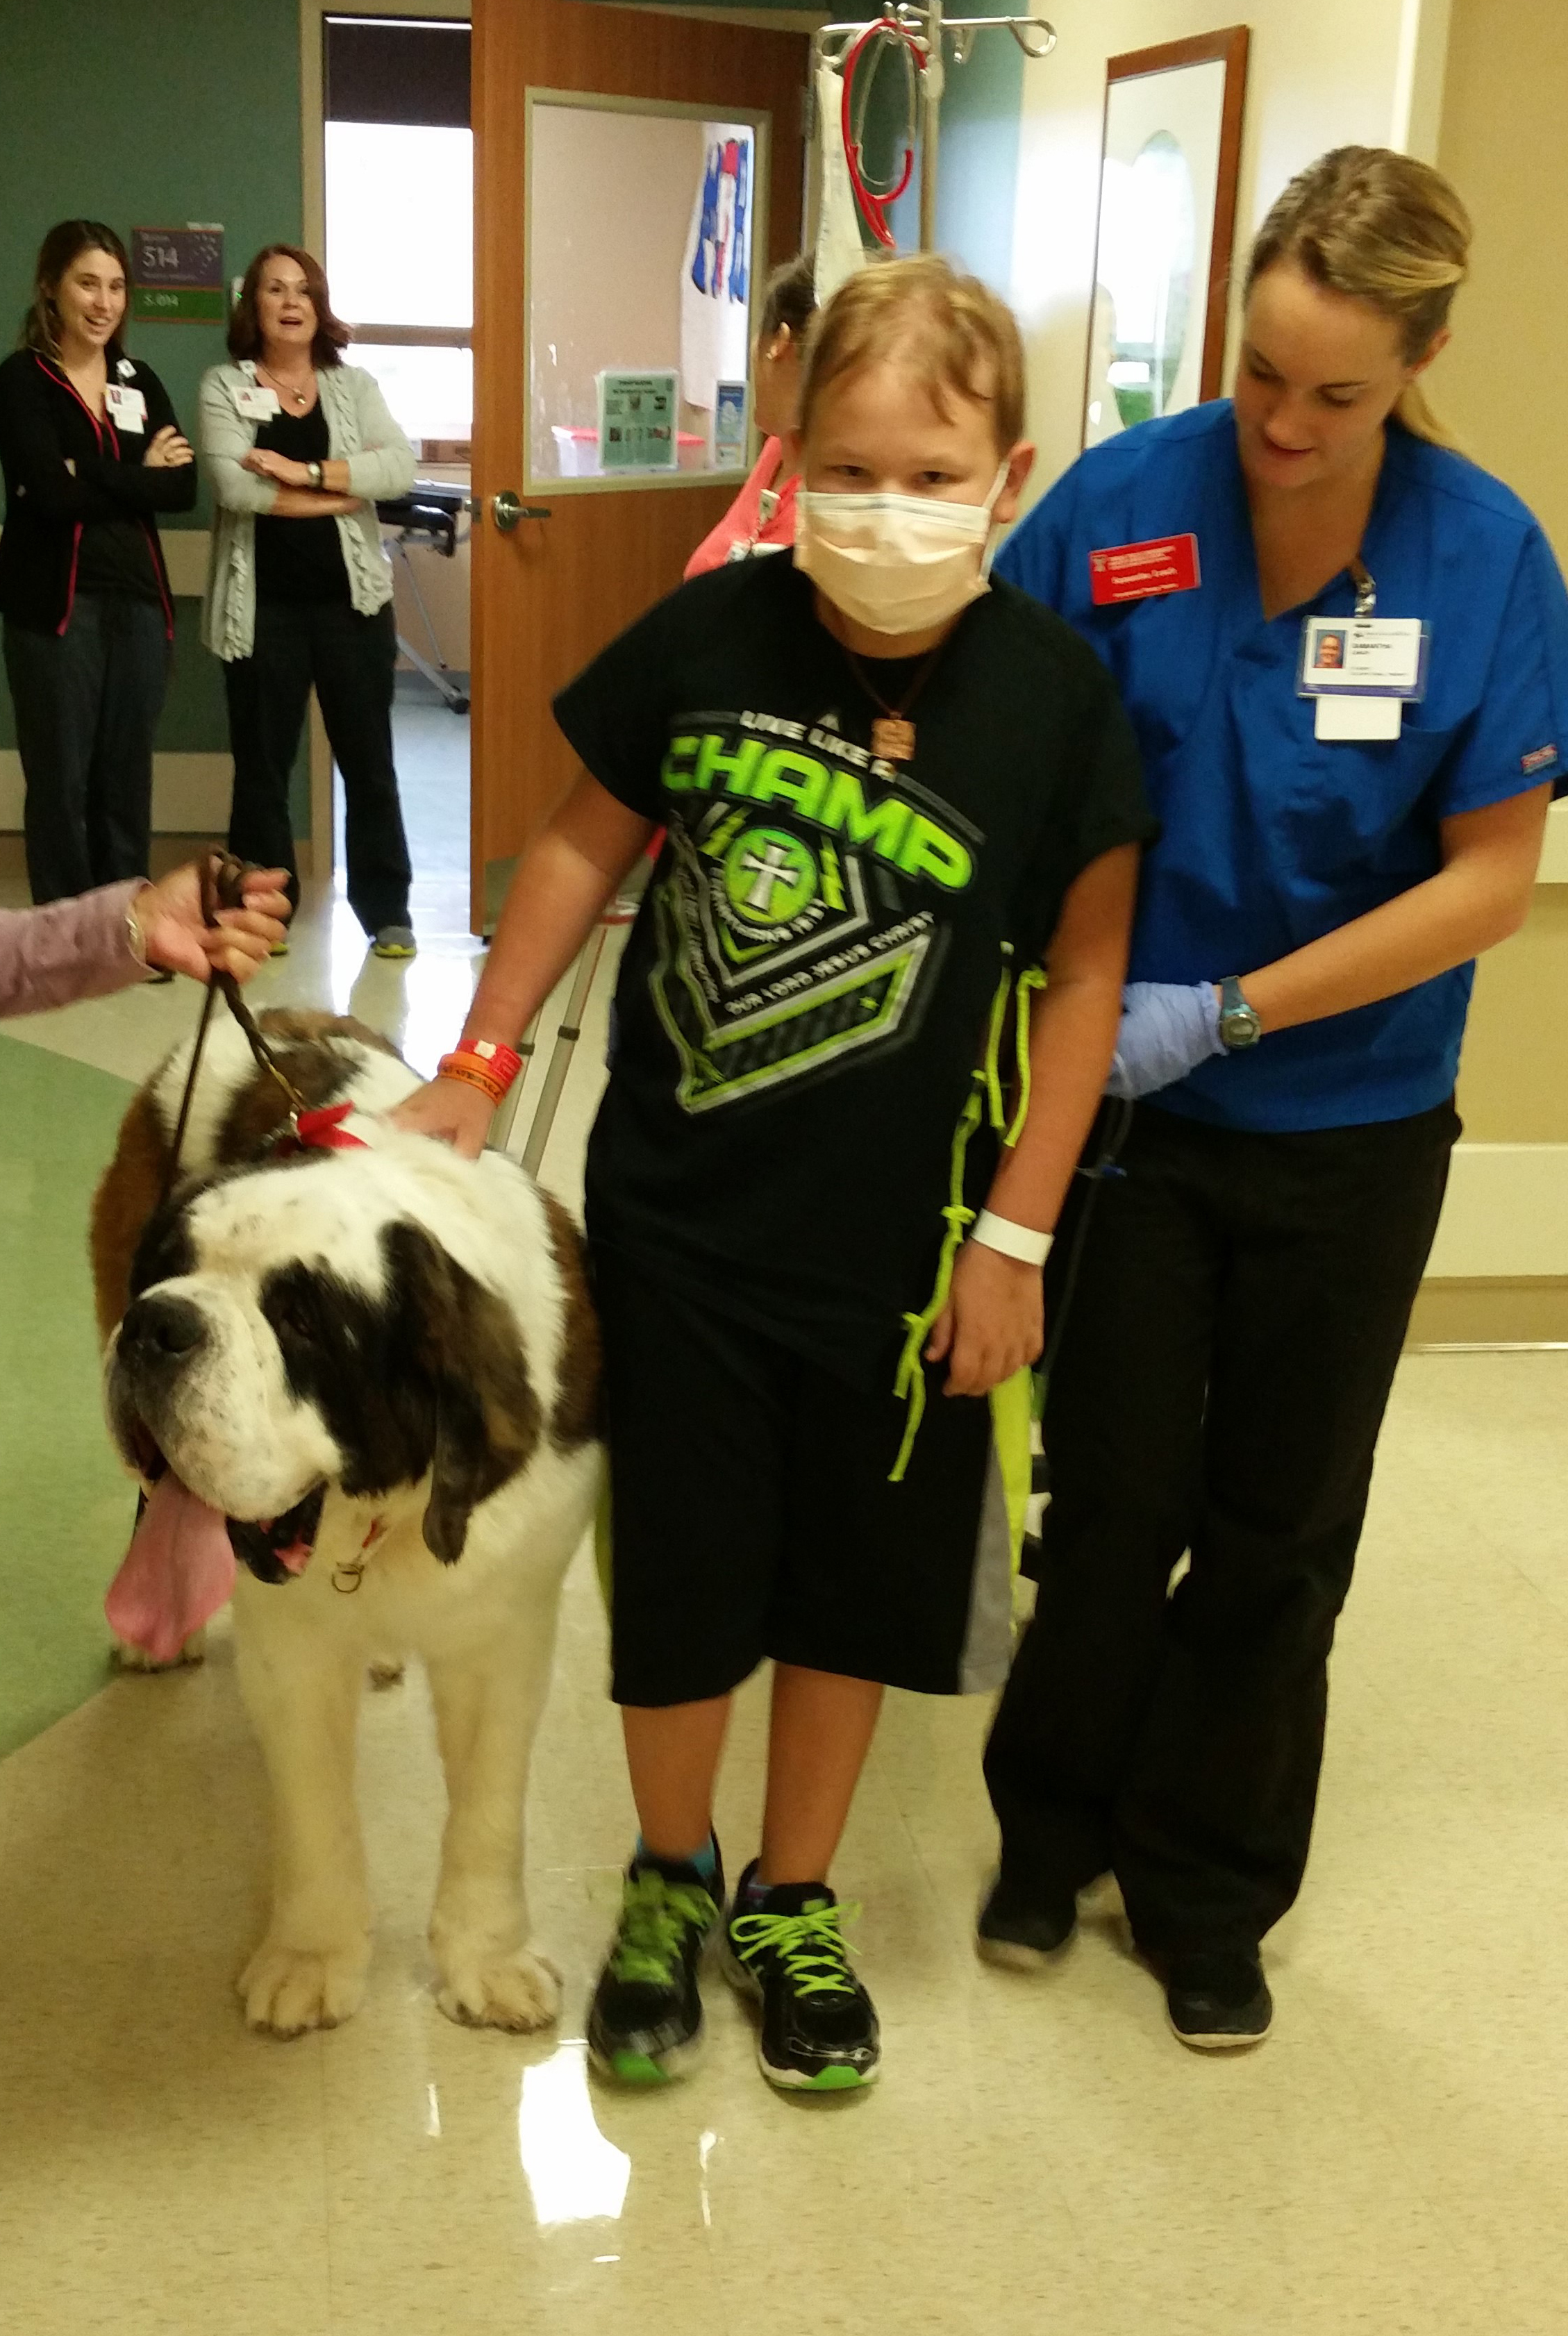 Luke Edmunds walks with a therapy dog